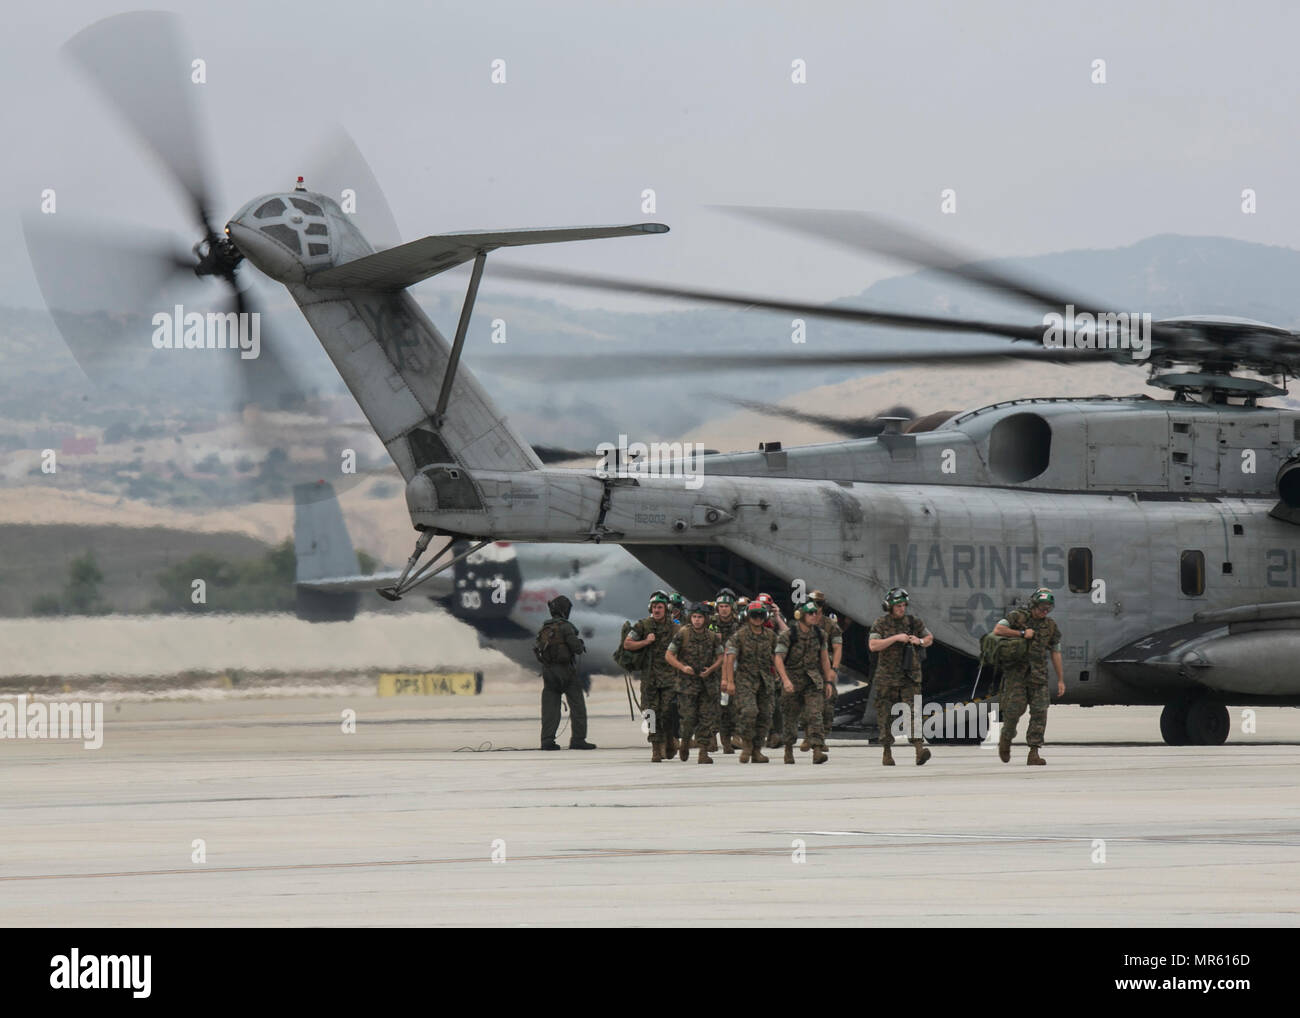 U.S. Marines with Light Attack Helicopter Squadron 369 (HMLA-369), 3d Marine Aircraft Wing, exits a CH-53E Super Stallion upon return from a deployment with the 11th Marine Expeditionary Unit, on Marine Corps Base Camp Pendleton, Calif., May 12, 2017. Friends and family members welcomed home Marines from the 11th MEU’s Command Element during a homecoming ceremony. (U.S. Marine Corps photo by Lance Cpl. Clare J. Shaffer/Released) Stock Photo